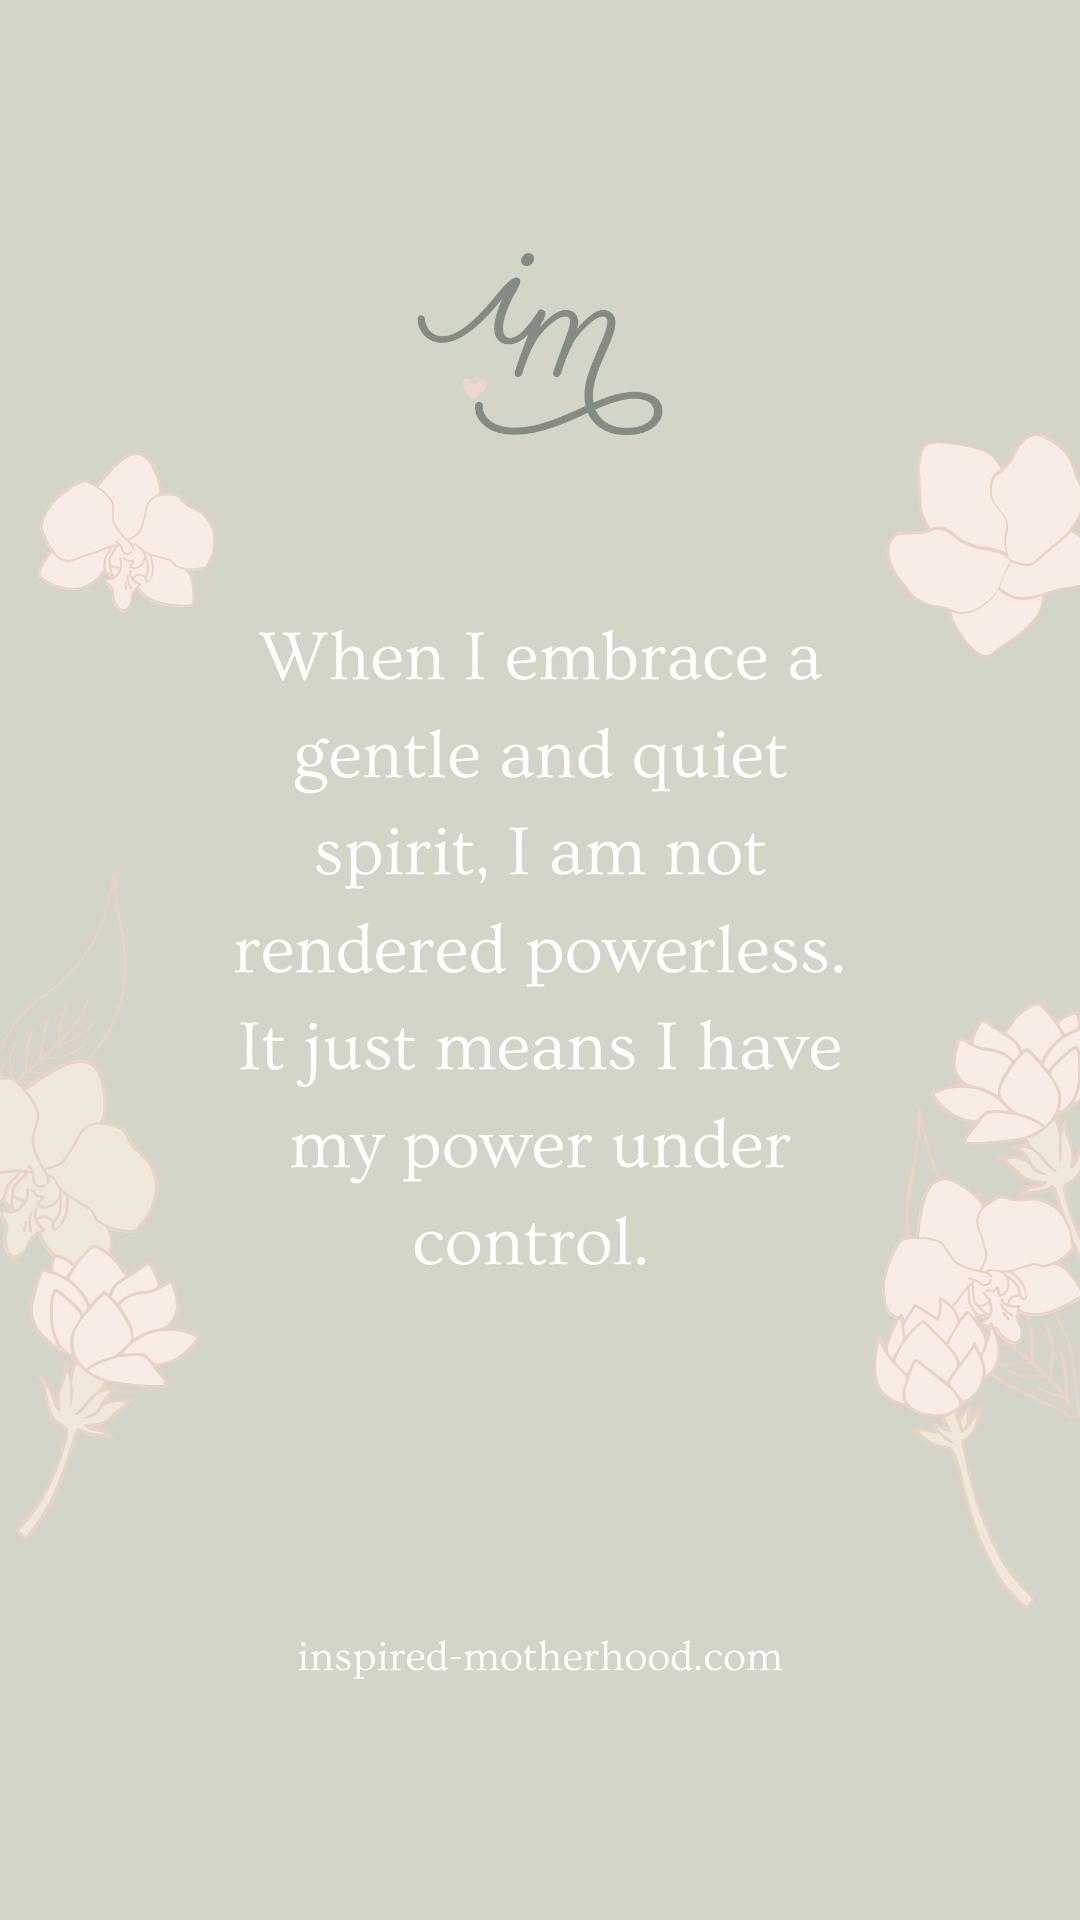 When I embrace a gentle and peaceful spirit, I am not rendered powerless. It just means I have my power under control. 